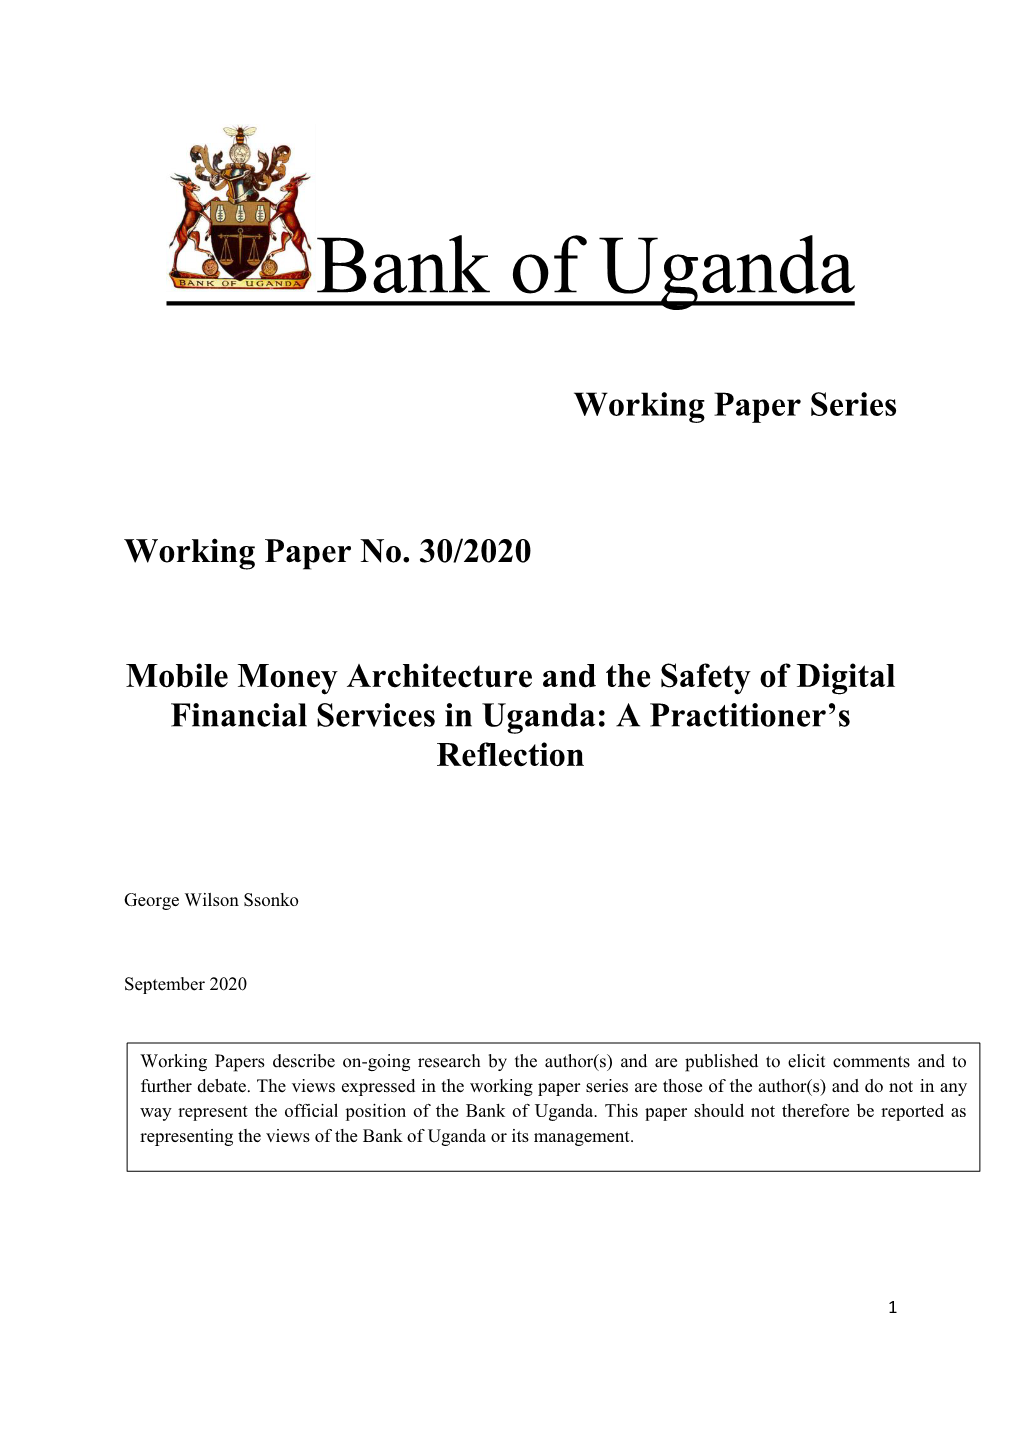 Bou WP30 2020 MM Architecture and the Safety of DFS in Uganda